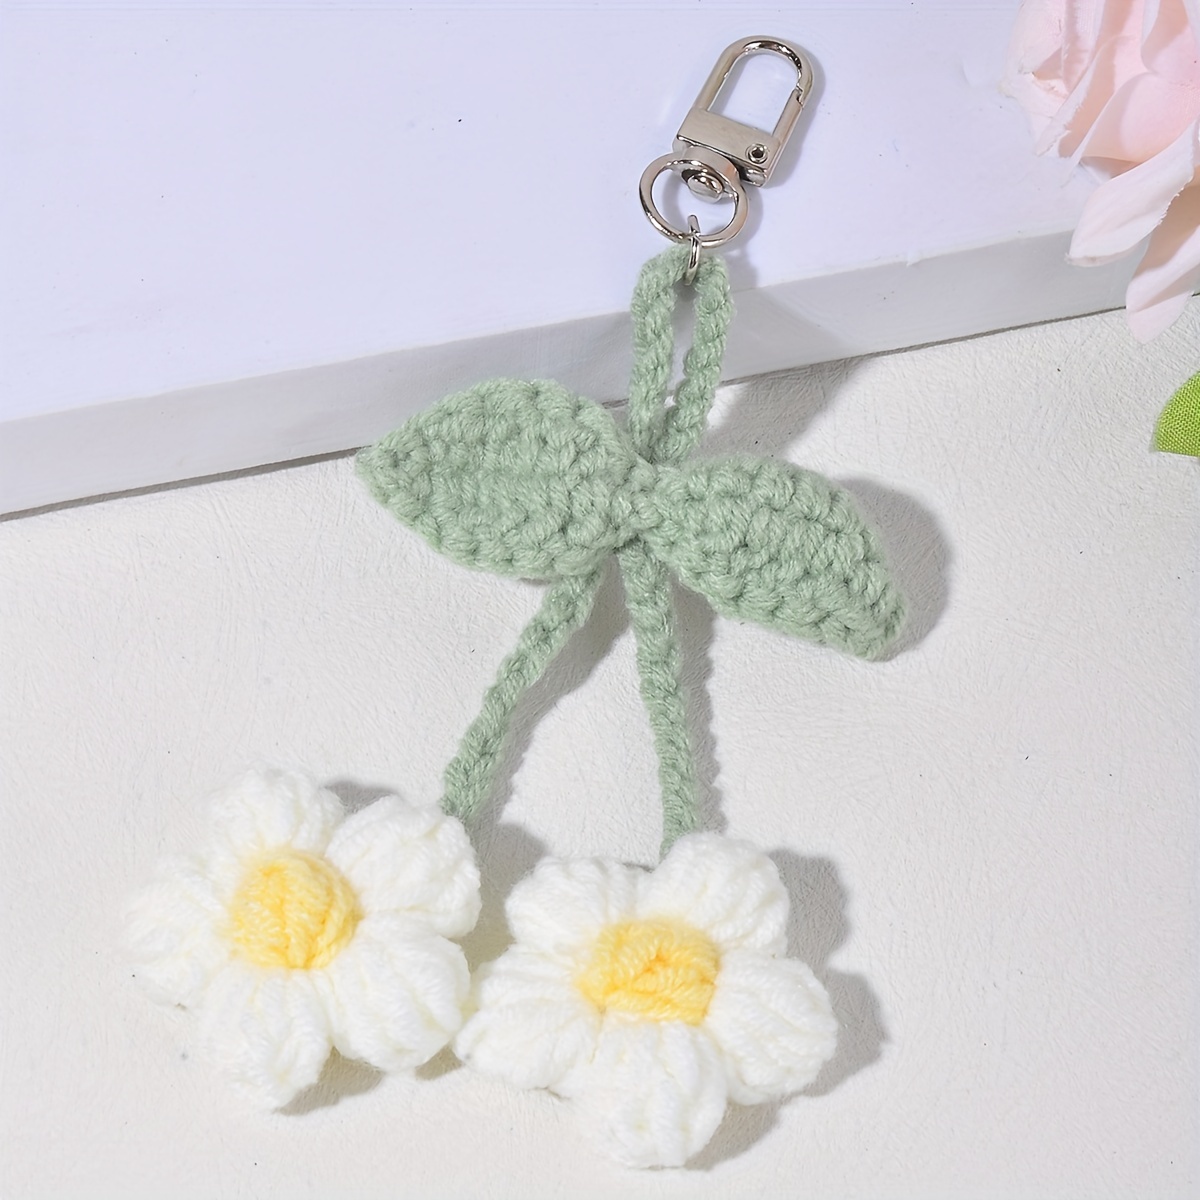 Handmade Crochet Kawaii Accessories - Keychains / Bag charms / Fridge magnets / Car hangings - Unique and Colorful mini gifts